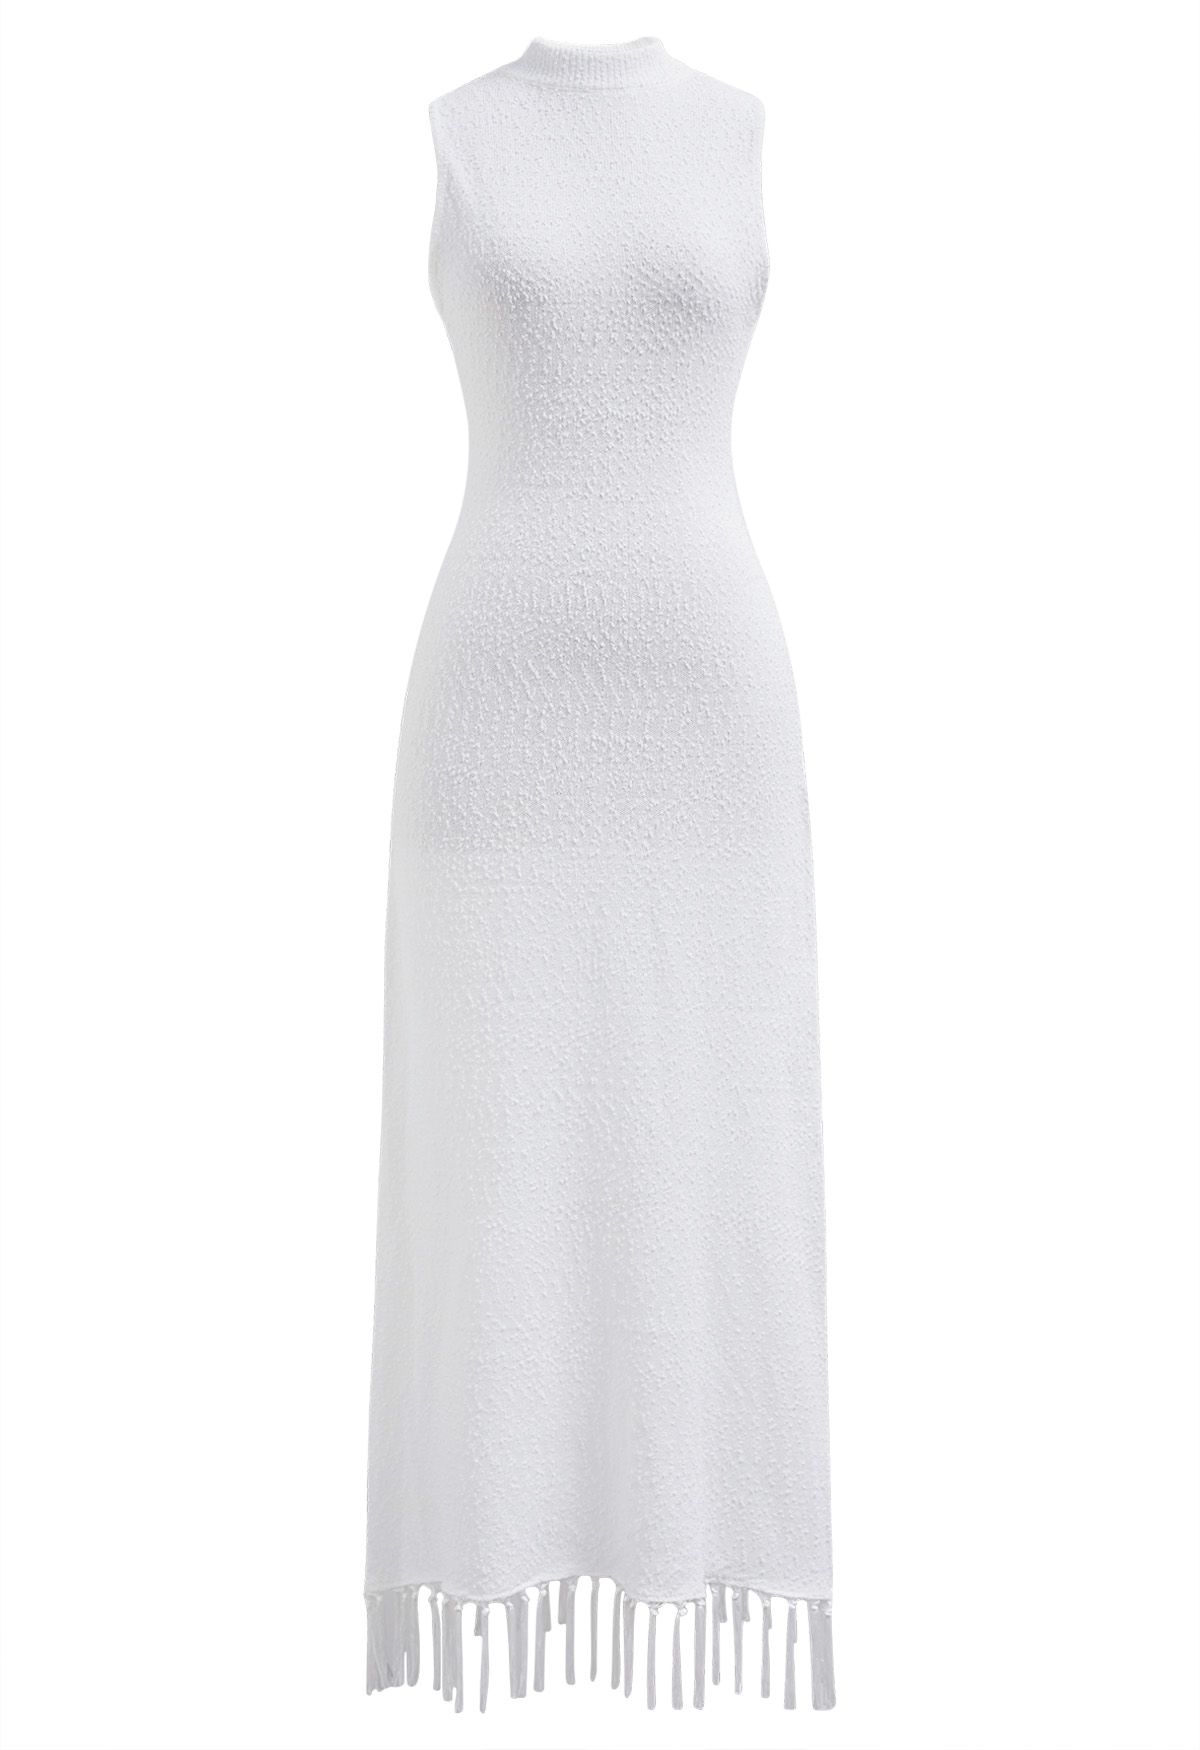 Fringed Texture Knit Sleeveless Maxi Dress in White